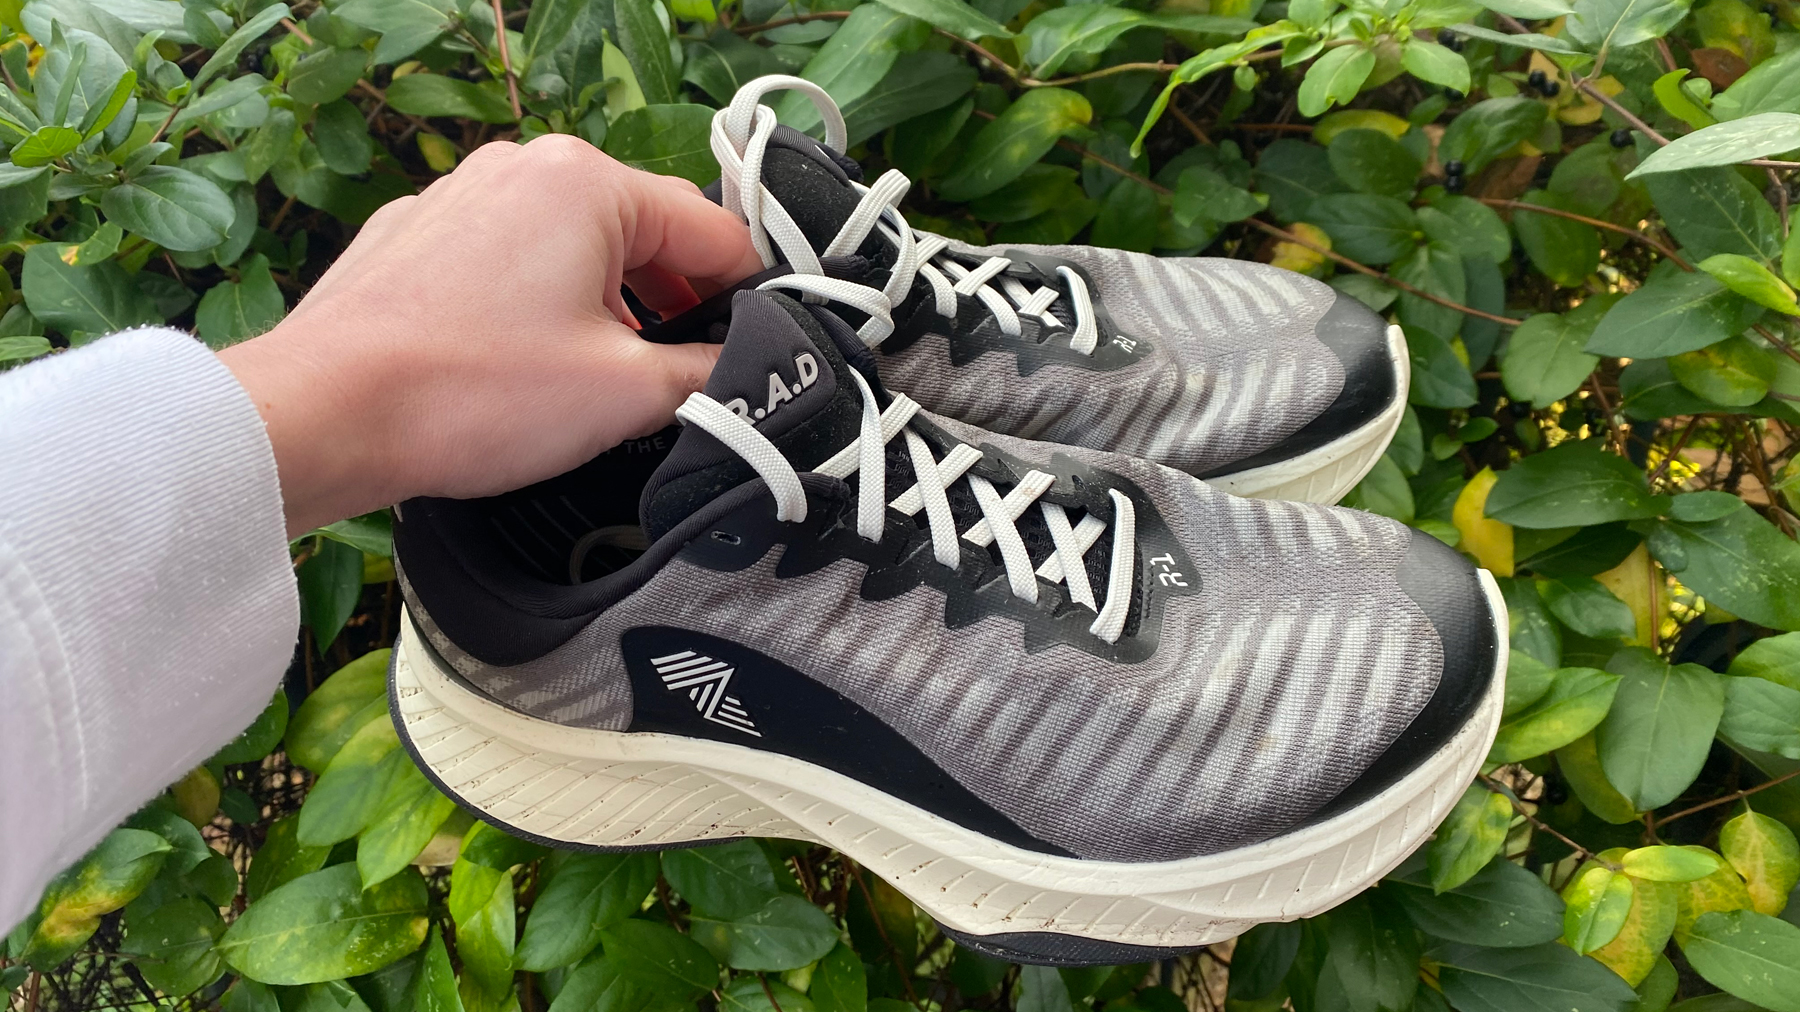 R.A.D R-1 review: A new kid on the running shoe block | Tom's Guide